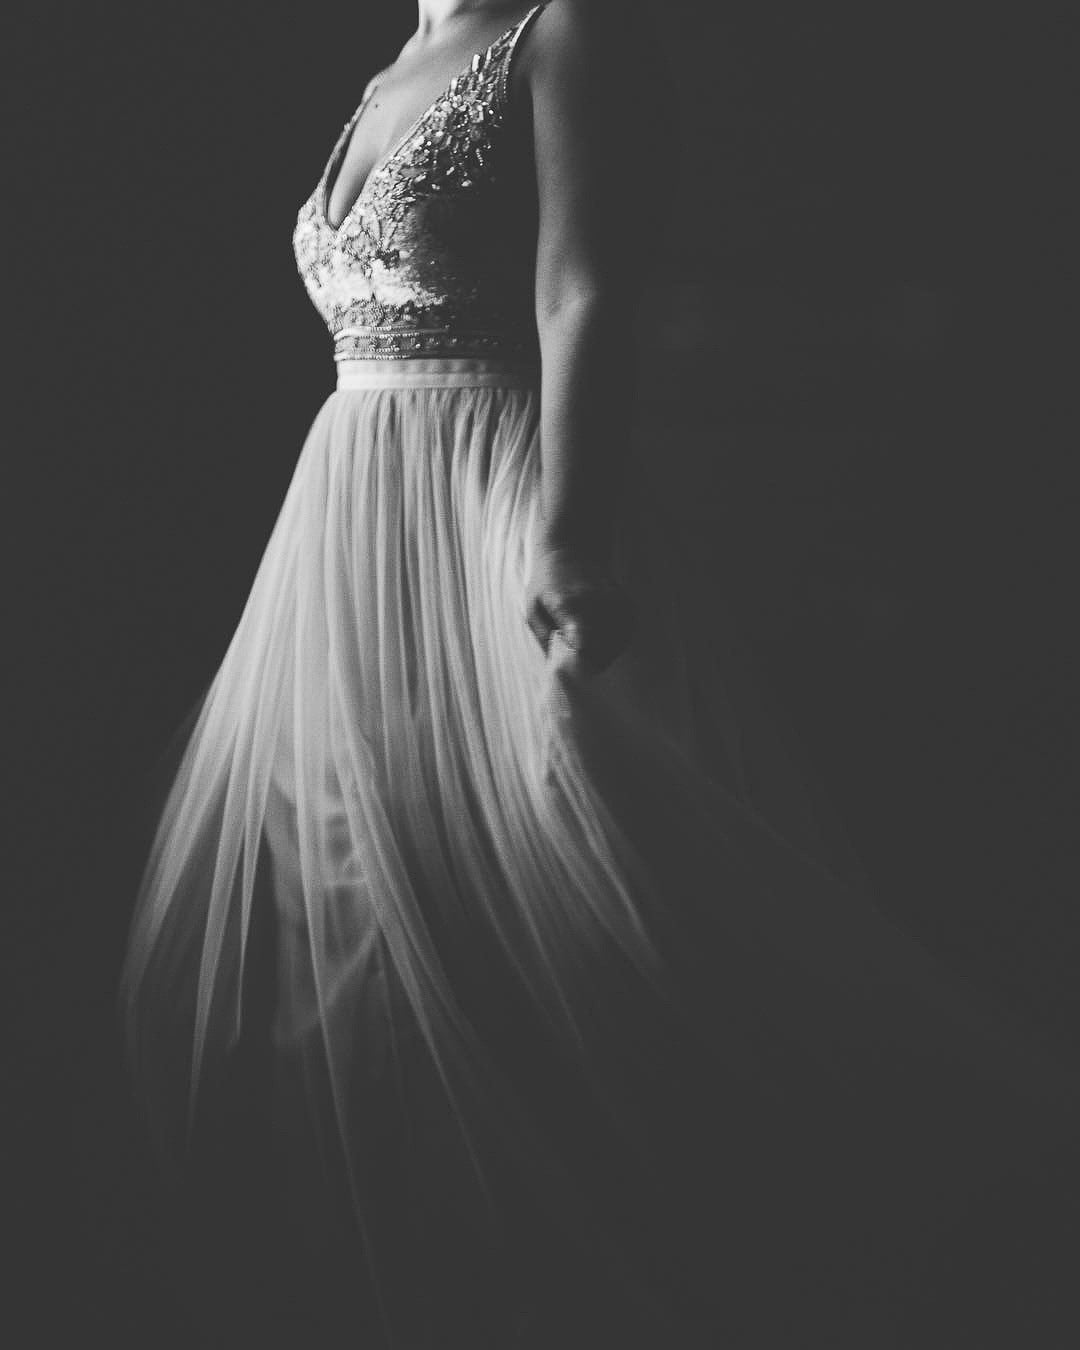 a black and white creatively cropped vignetted image of a bride in her wedding attire